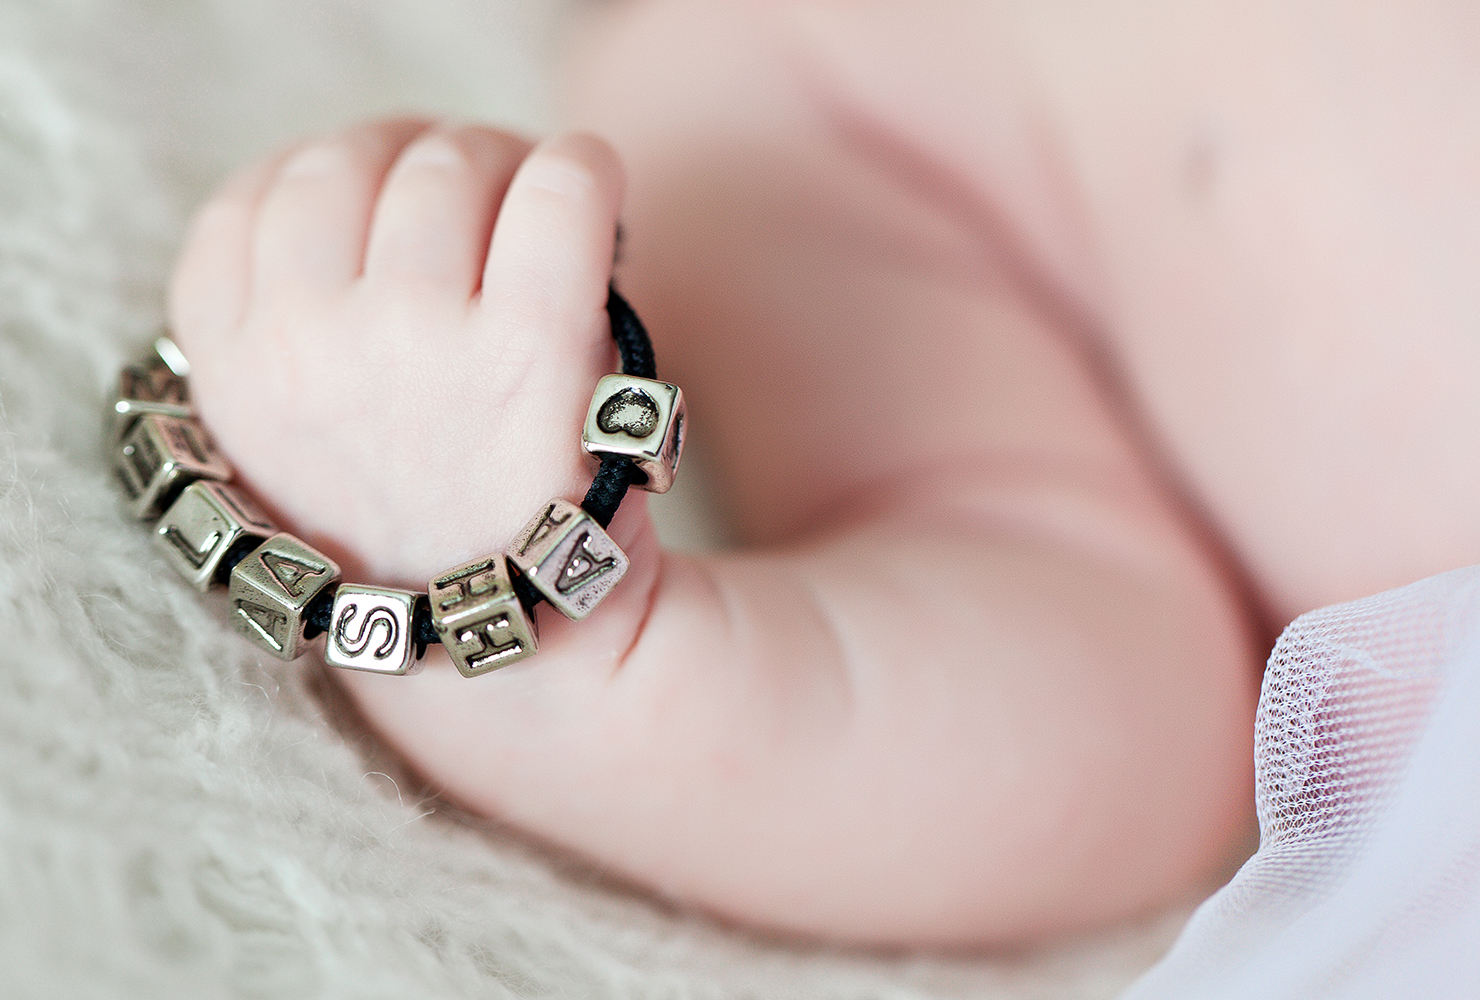 baby holding a bracelet with their name.